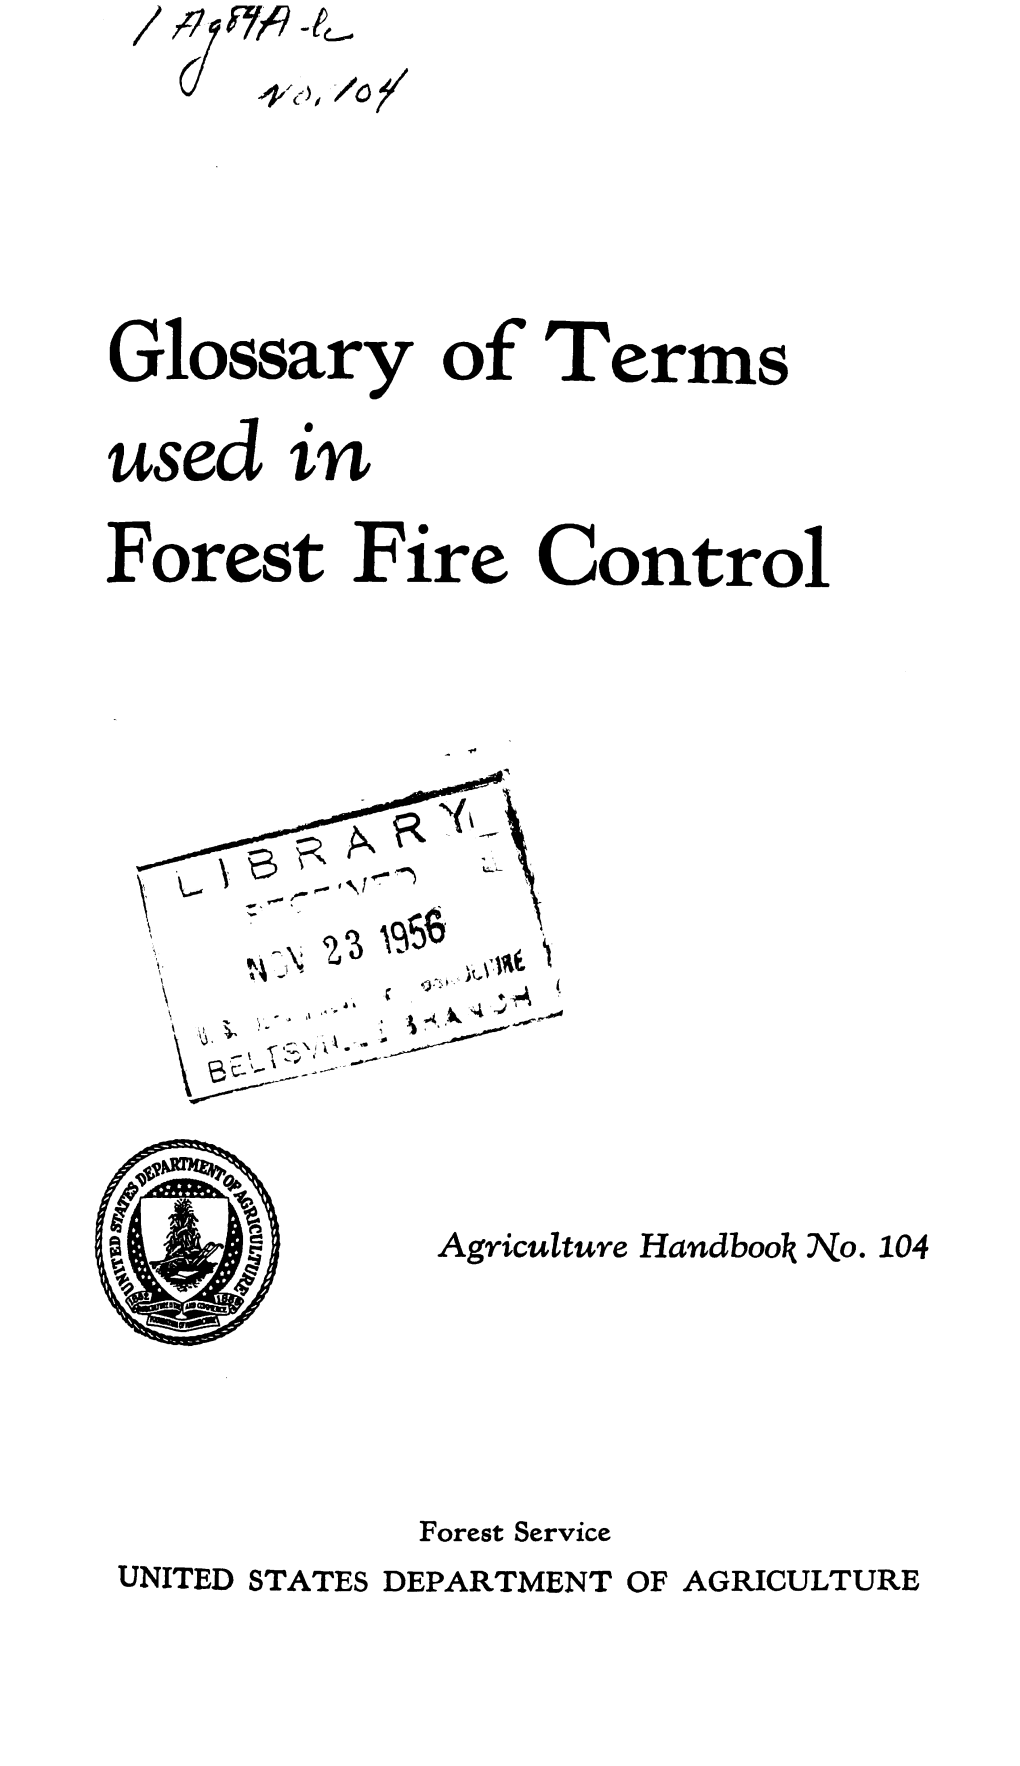 Glossary of Terms Used in Forest Fire Control